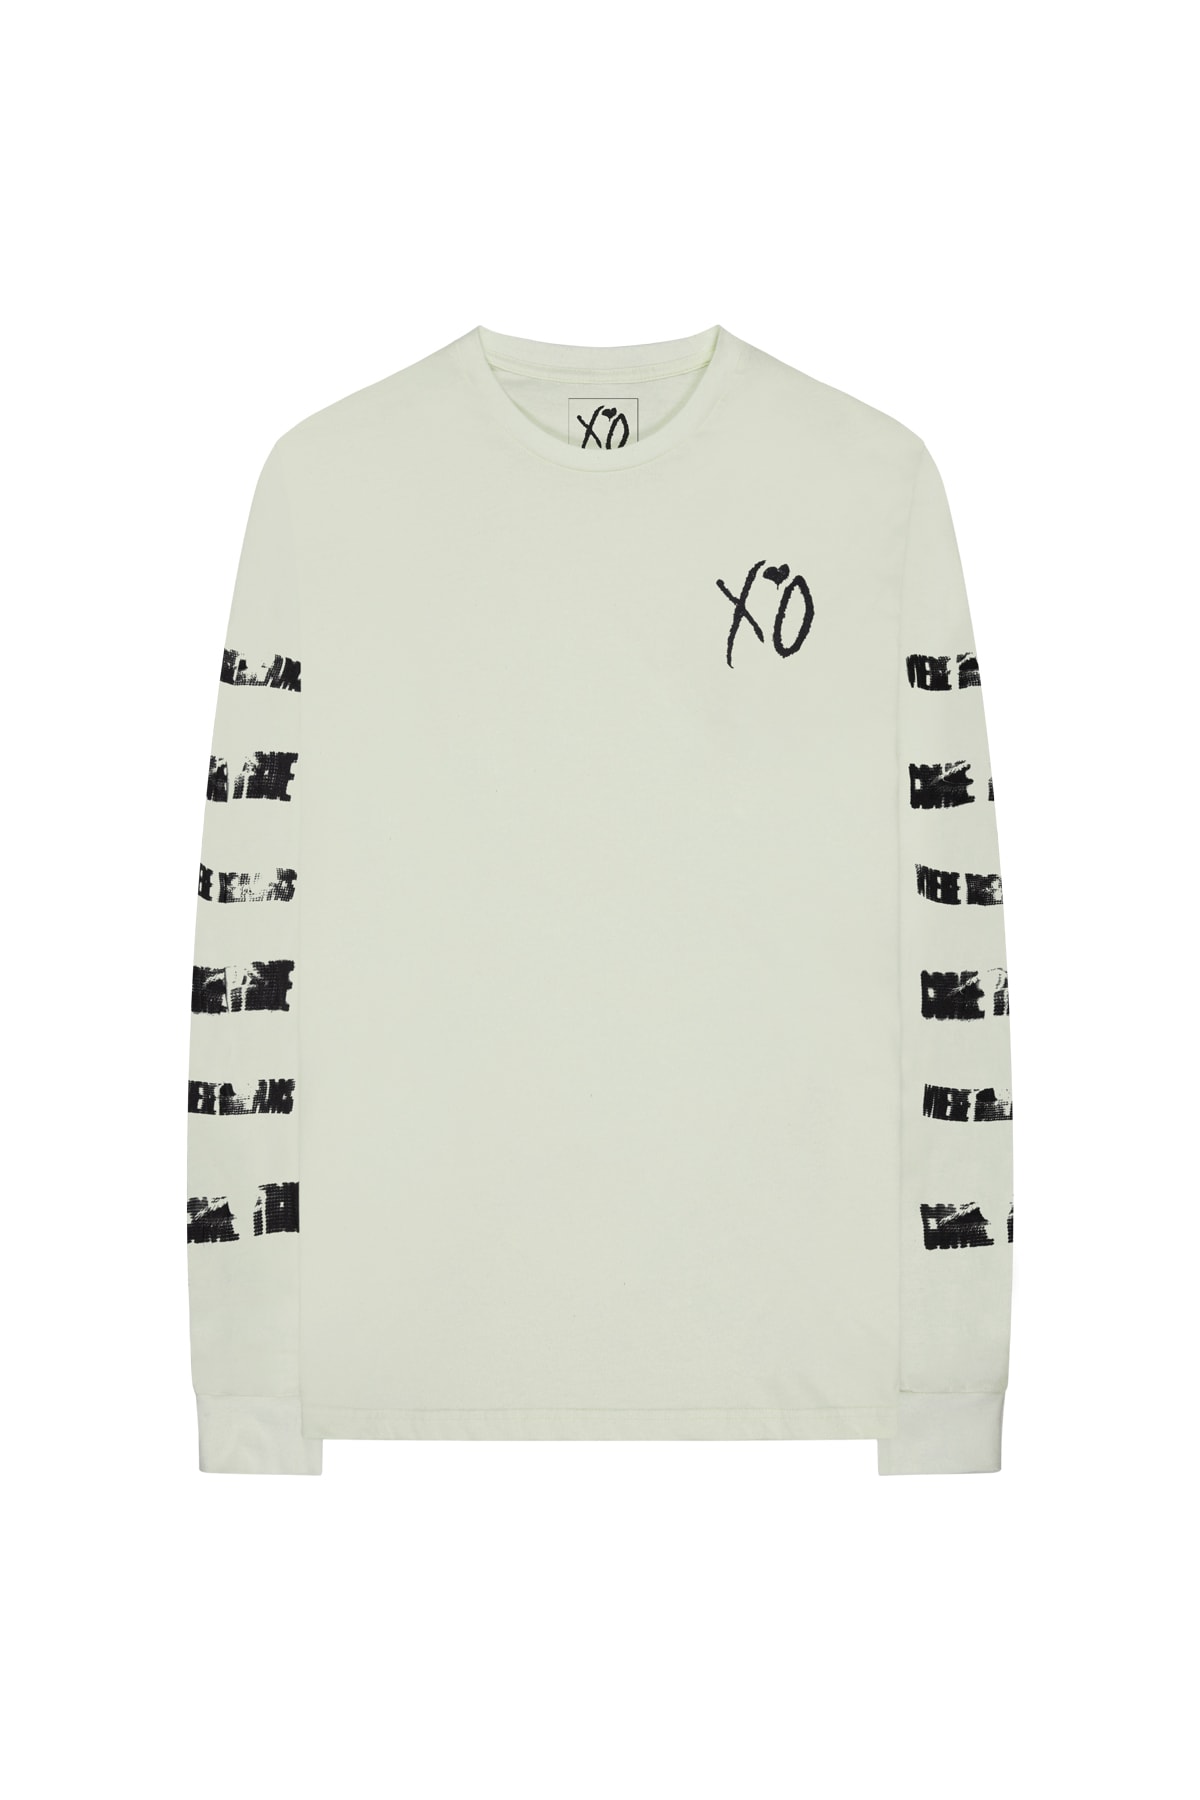 The Weeknd XO Tour Merch Release 004 Visions Long Sleeve Tan